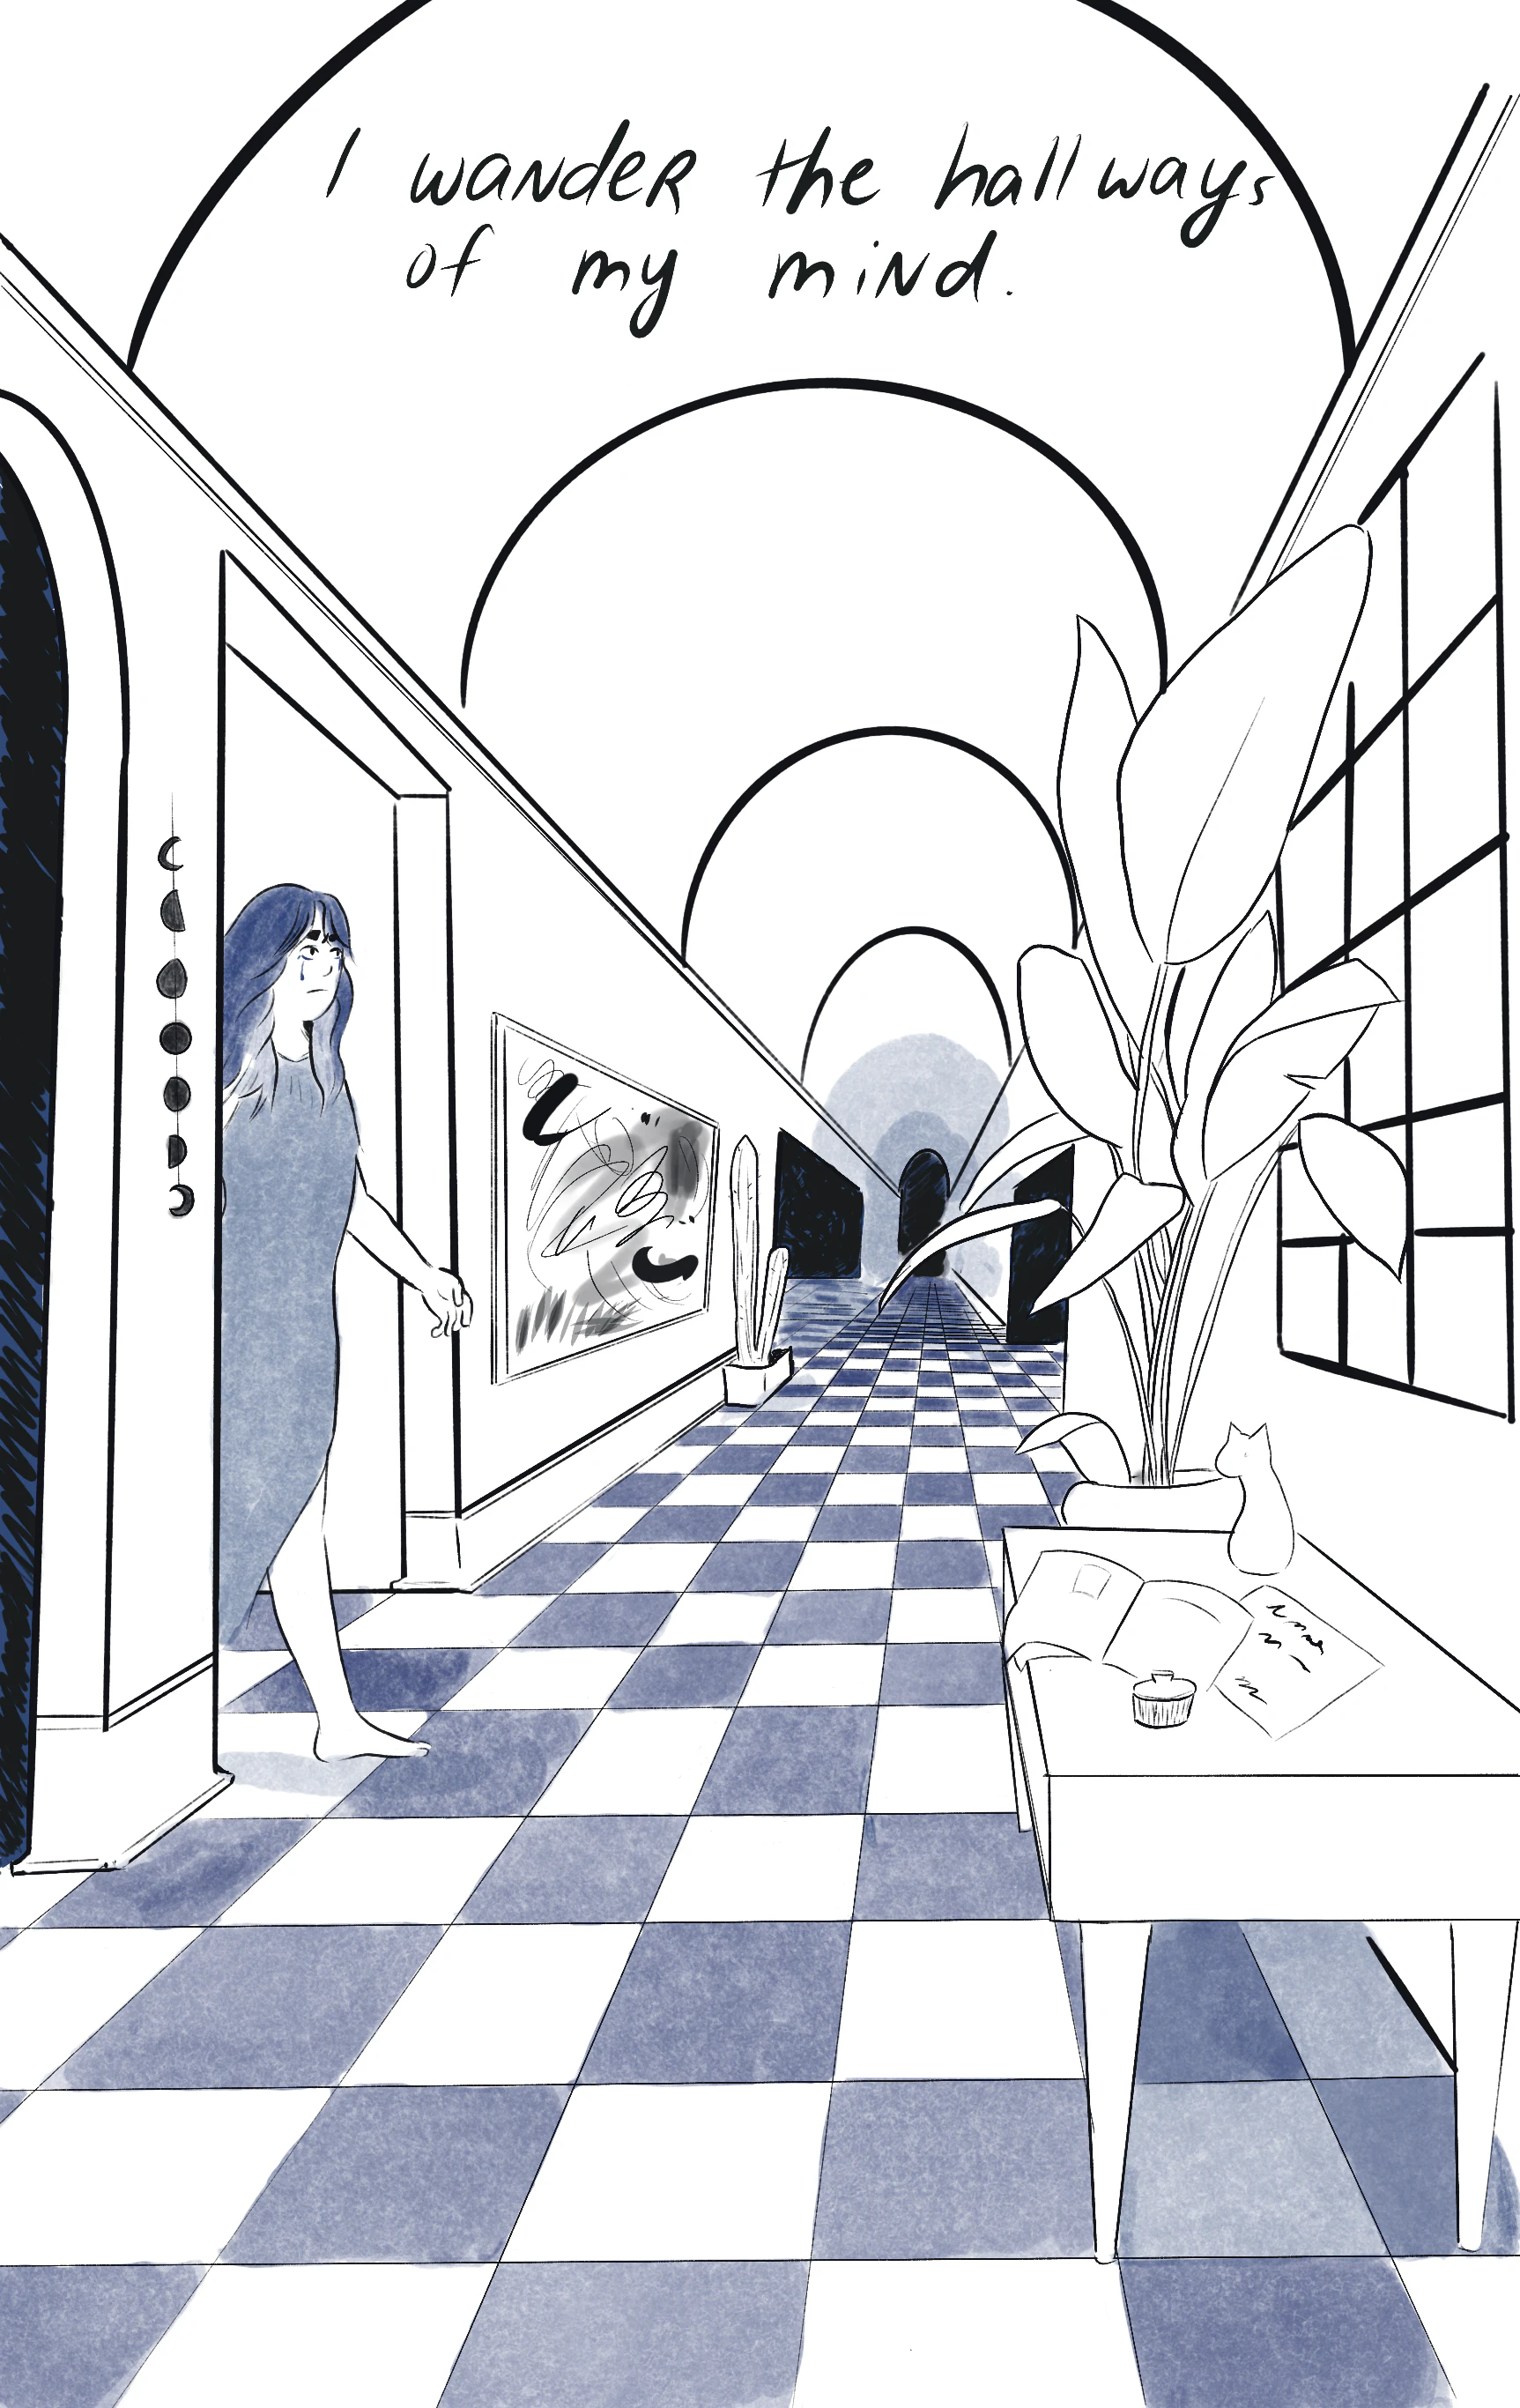 “I wander the hallways of my mind.”
Rachel is walking through a threshold into a hallway with blue and white checkered tiles and a rounded ceiling. There are potted plants and artworks decorating the space. Tears are still streaming down their face.